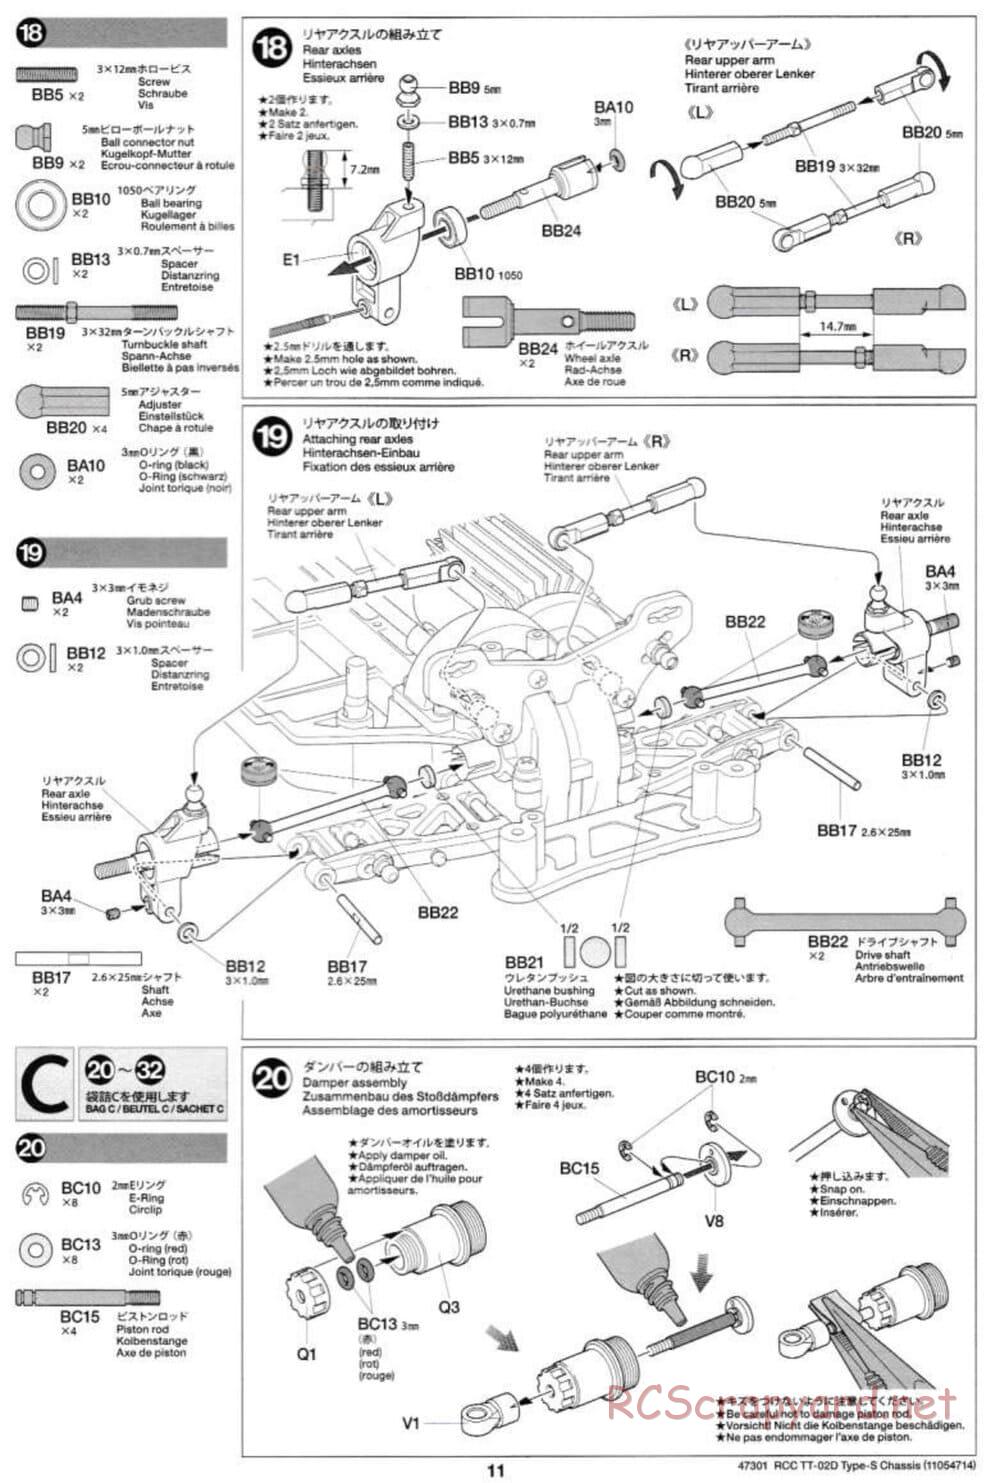 Tamiya - TT-02D Type-S Chassis - Manual - Page 11